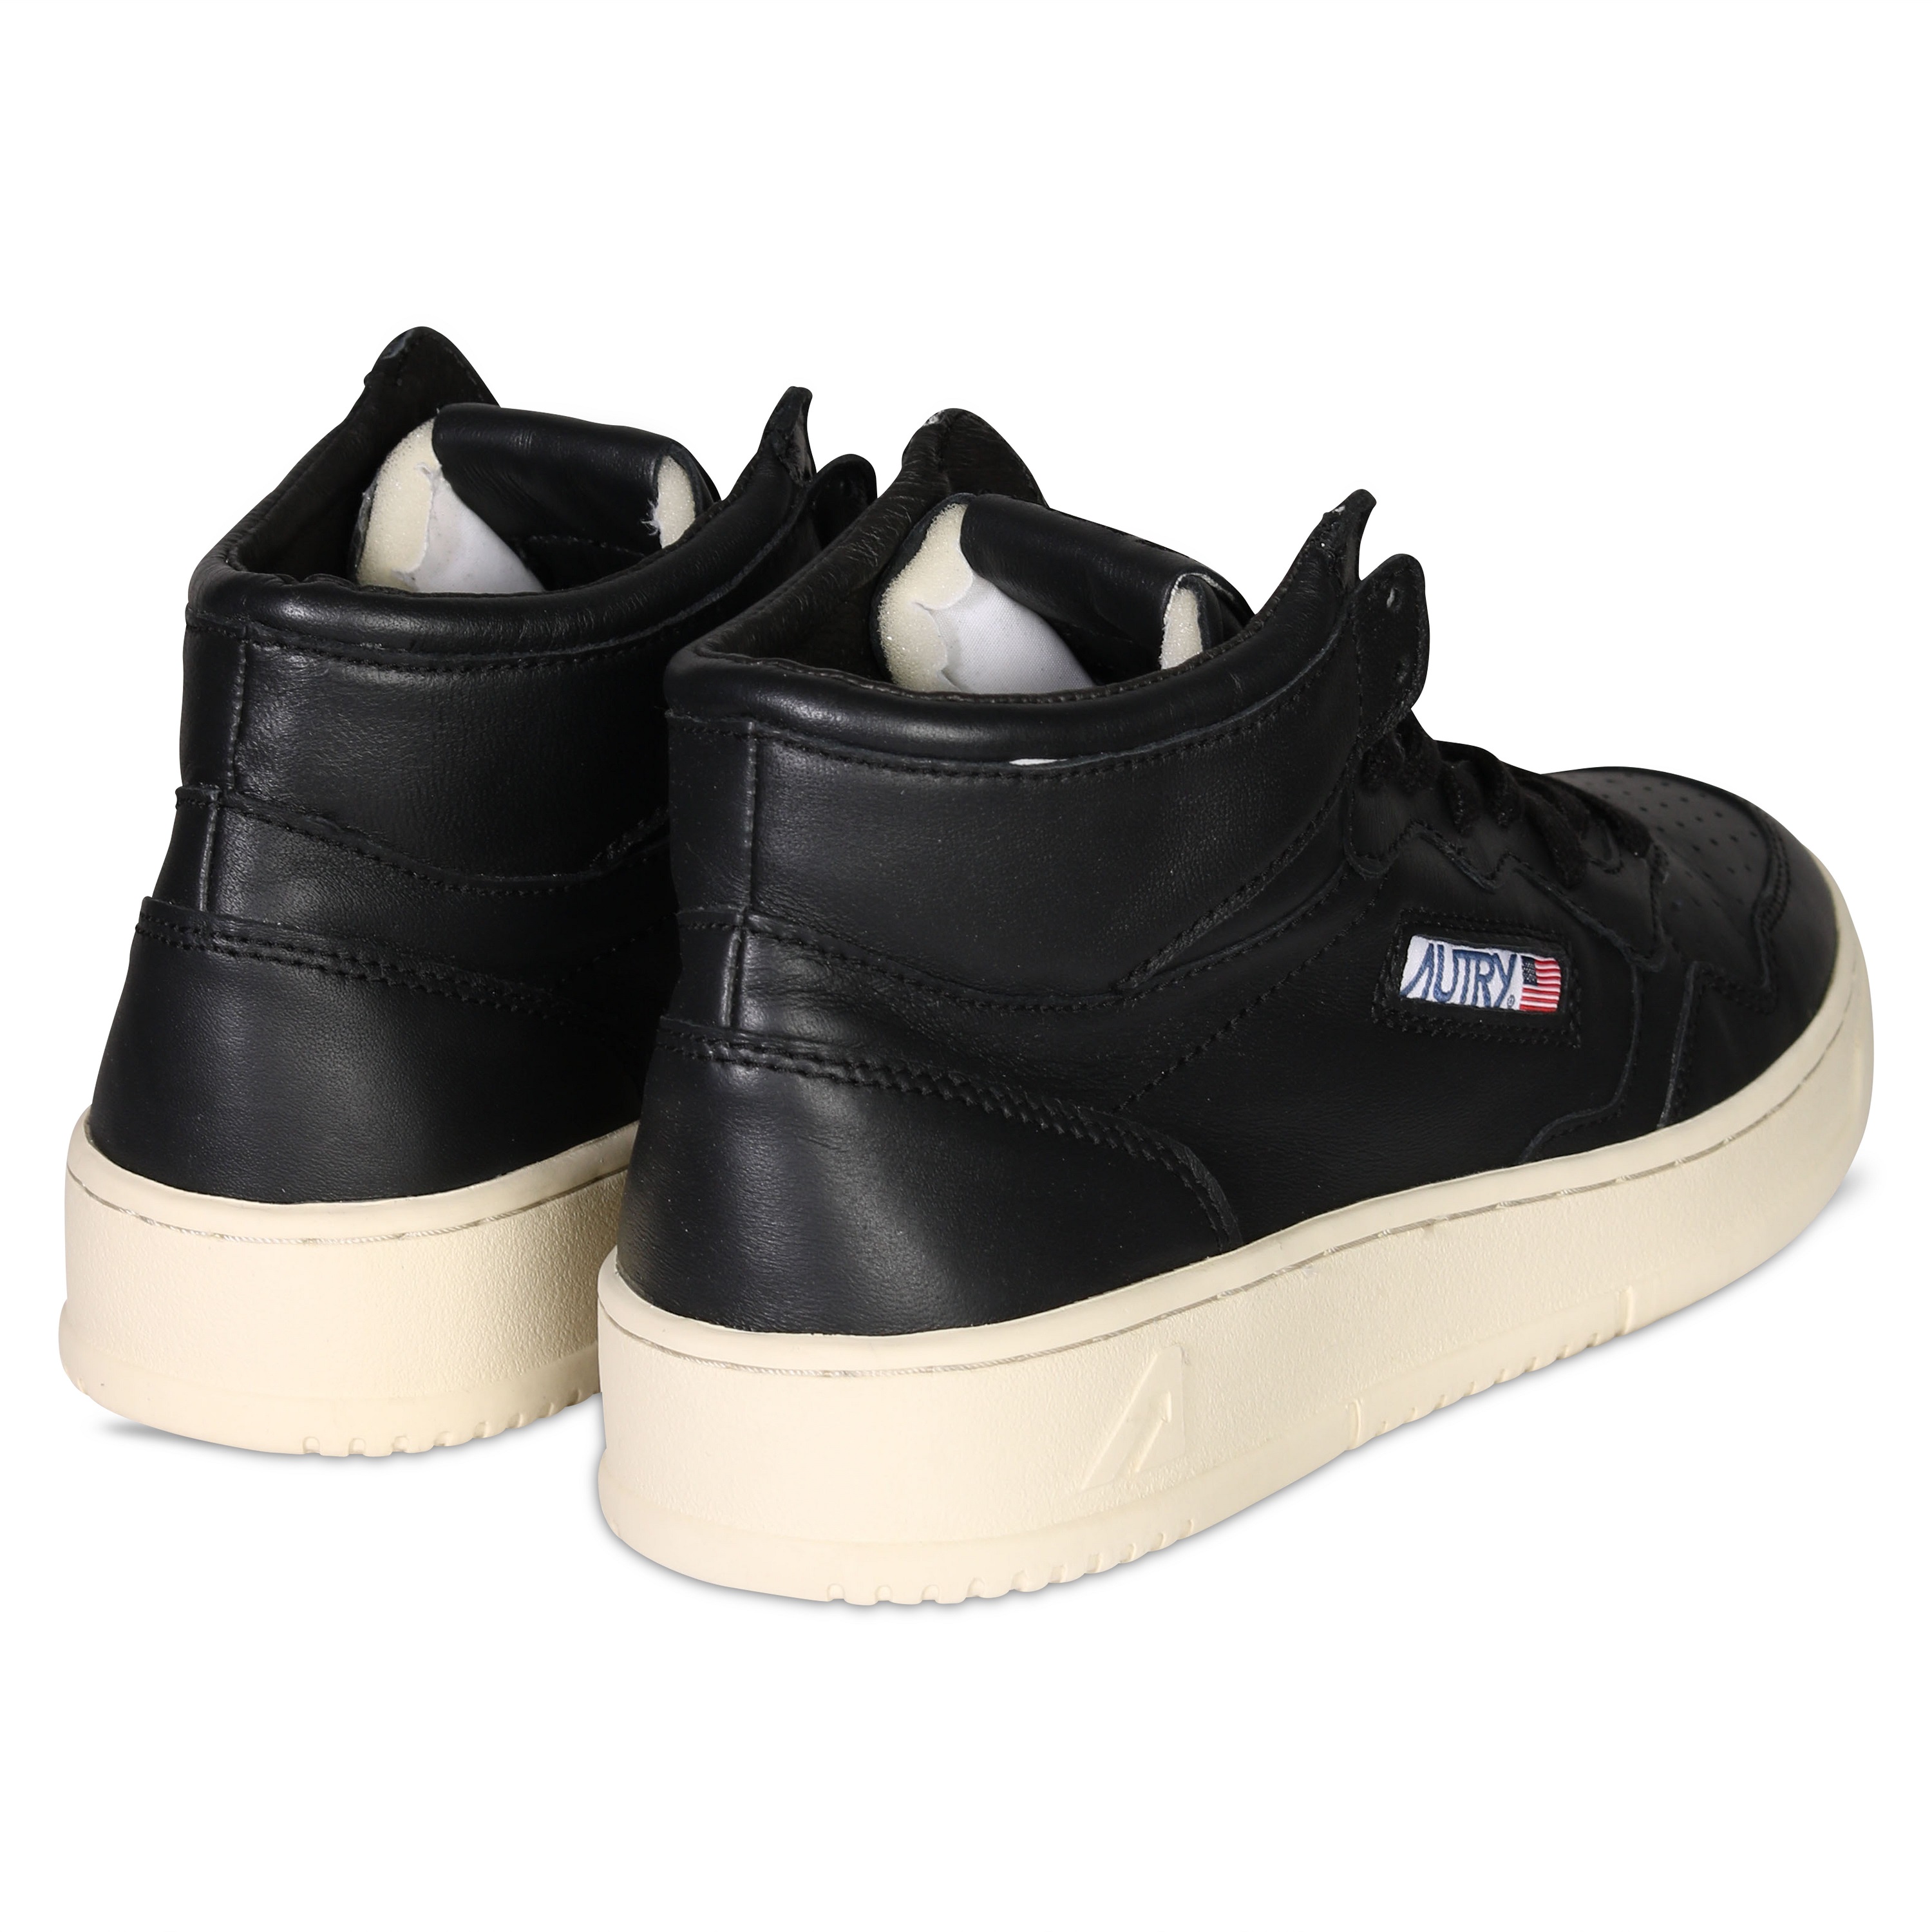 Autry Action Shoes Mid Sneaker Goat in Black 39